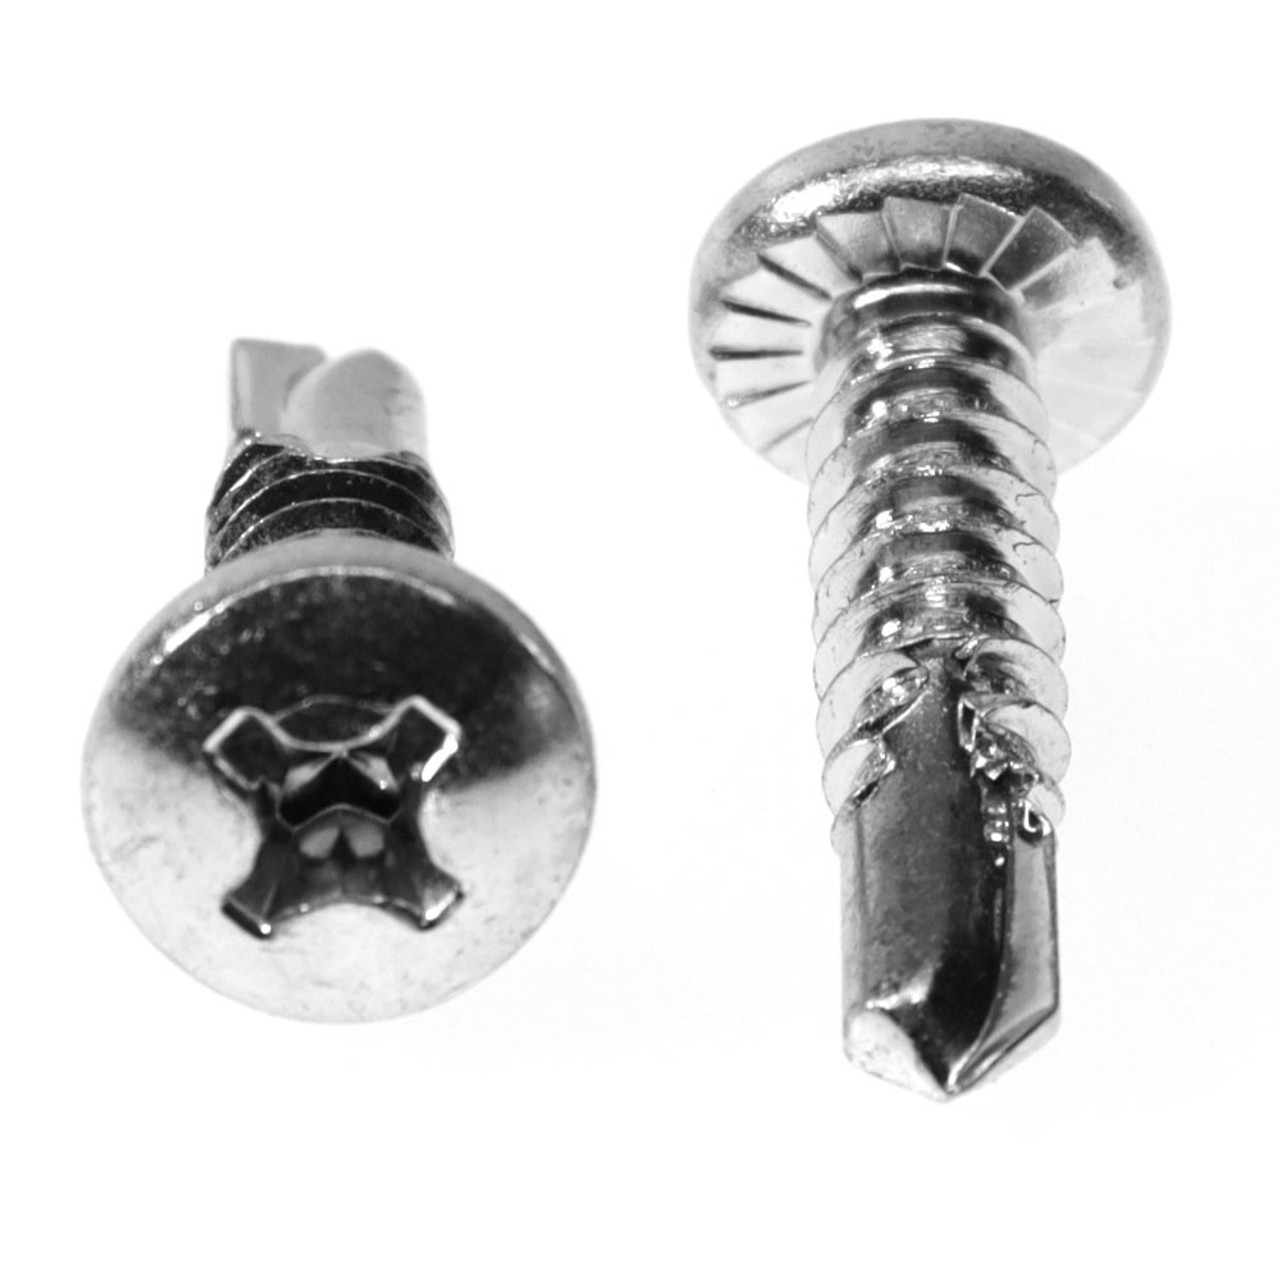 1/4-14 x 1 1/4 Self Drilling Screw Phillips Pan Head with Serration #3 Point Low Carbon Steel Zinc Plated